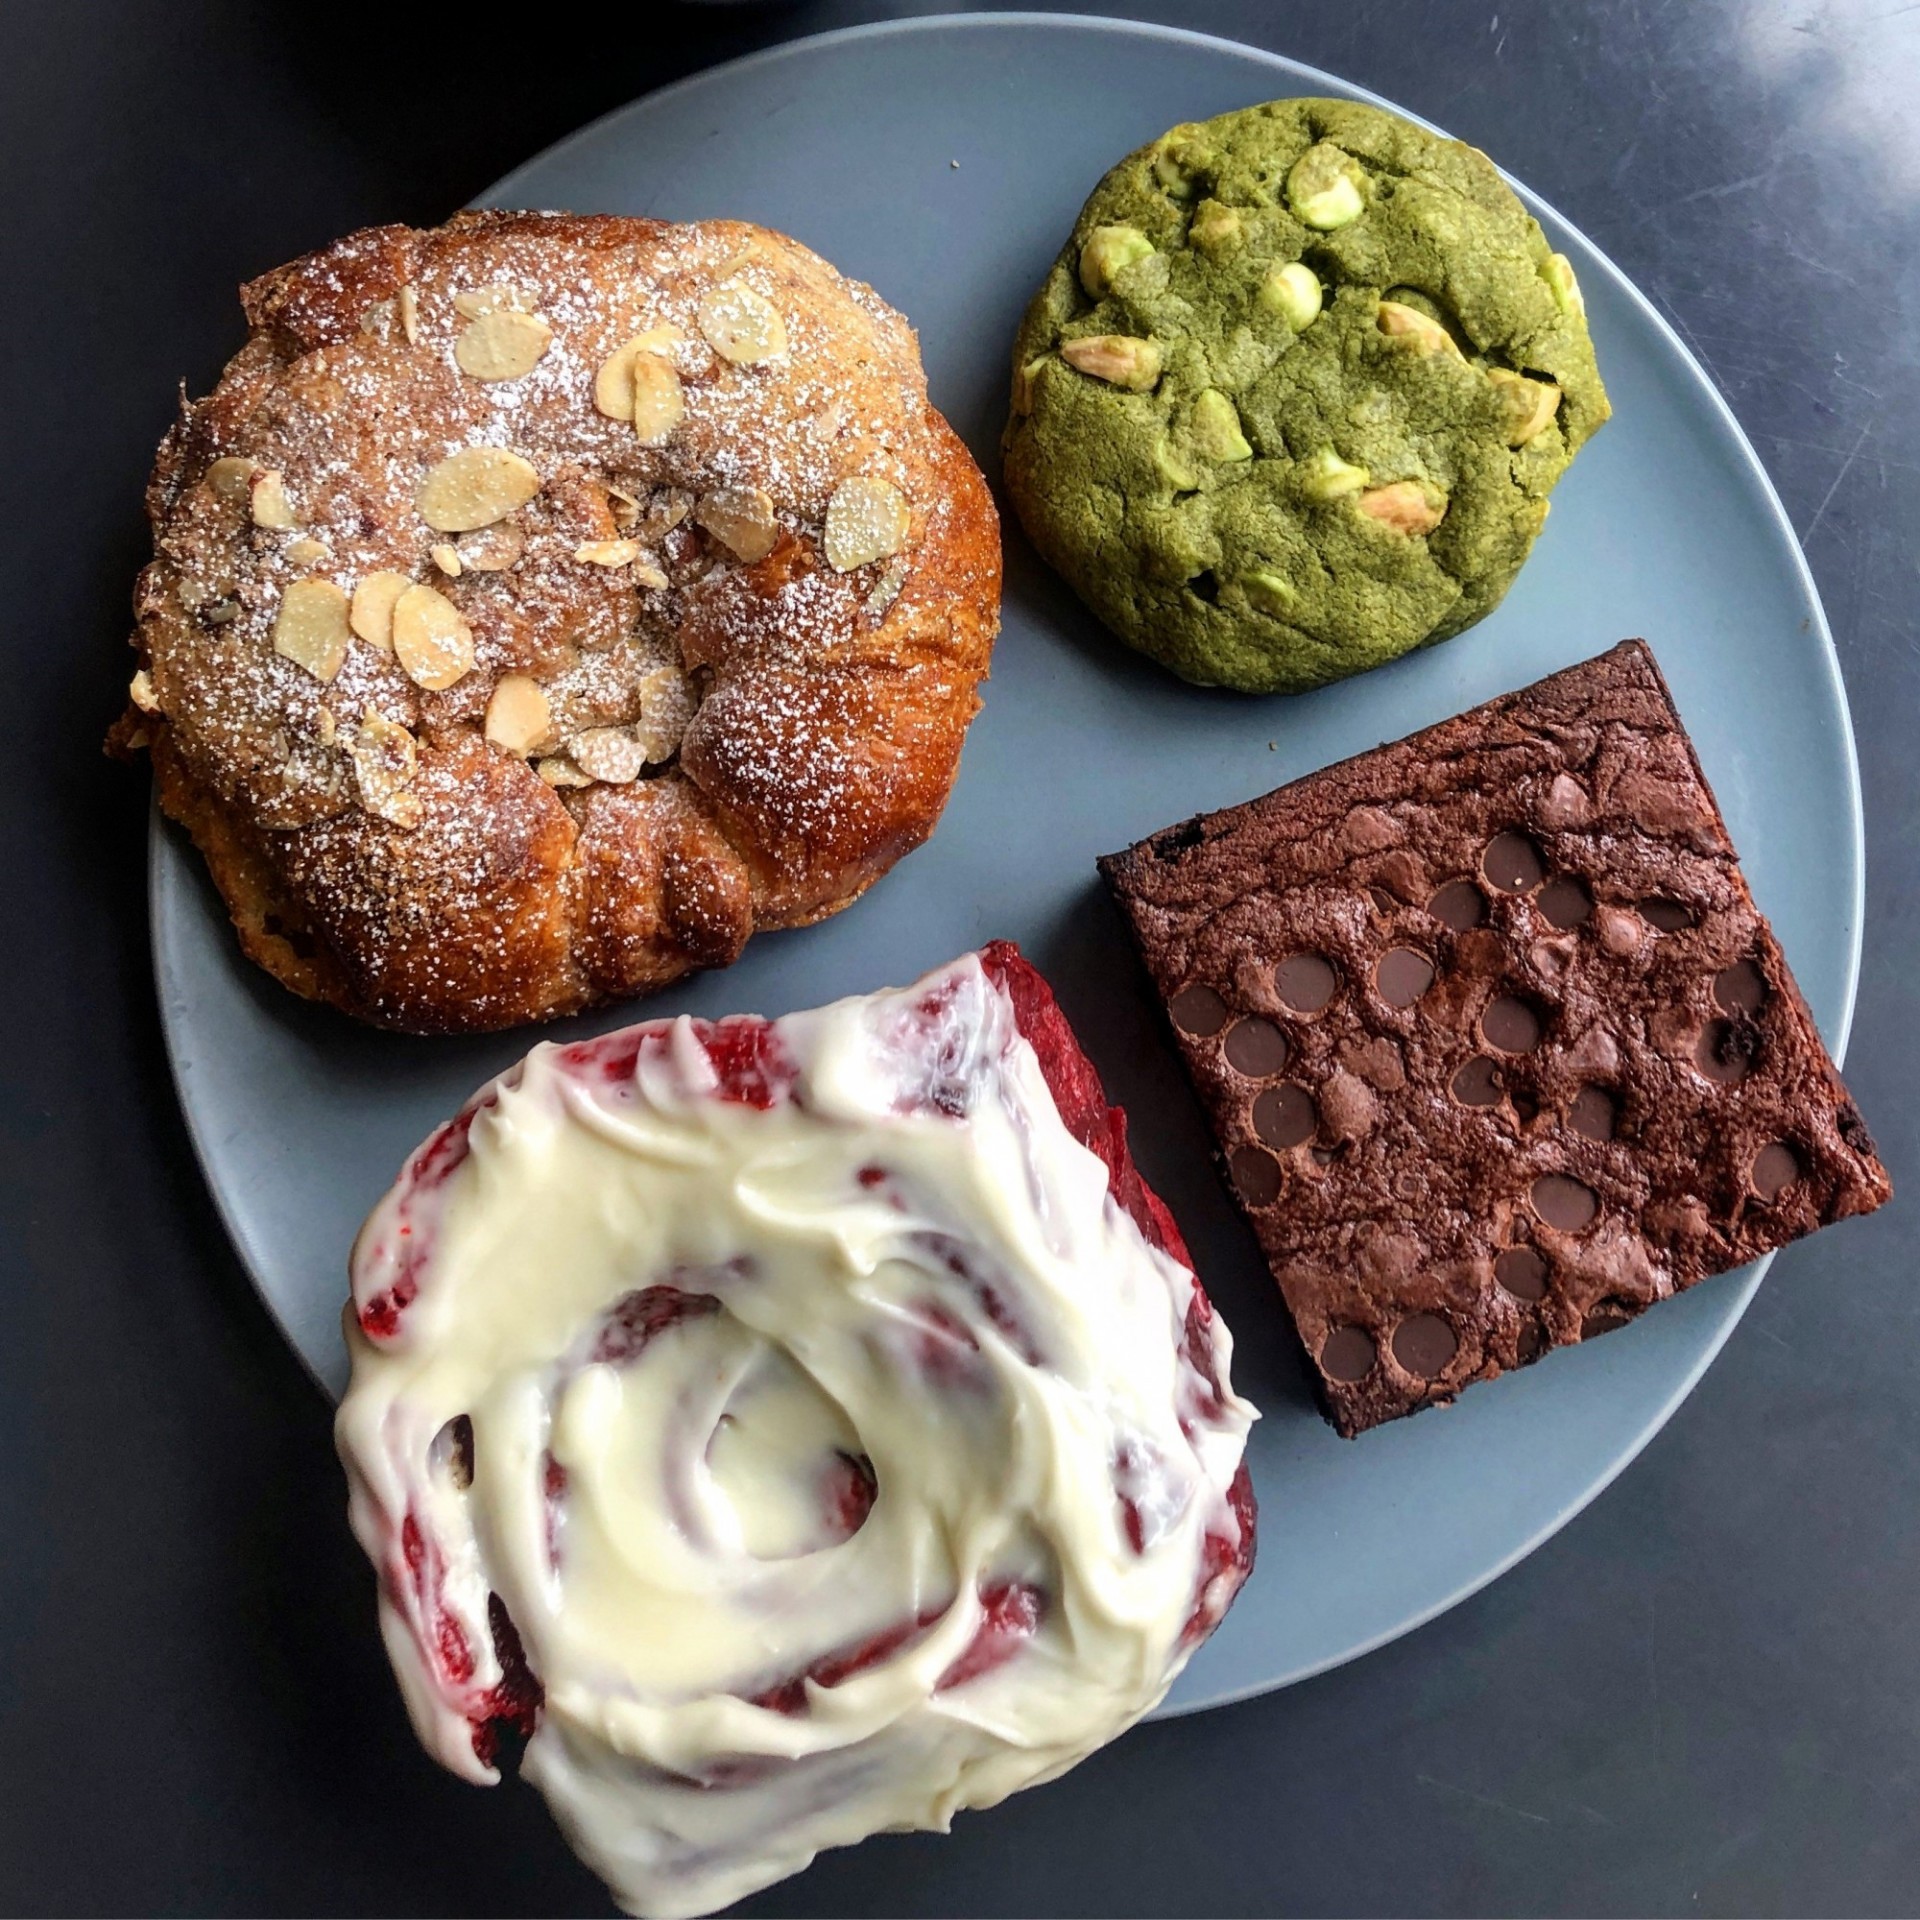 Apple cinnamon french toast croissant, matcha cookie, gluten-free brownie, and red velvet cinnamon roll